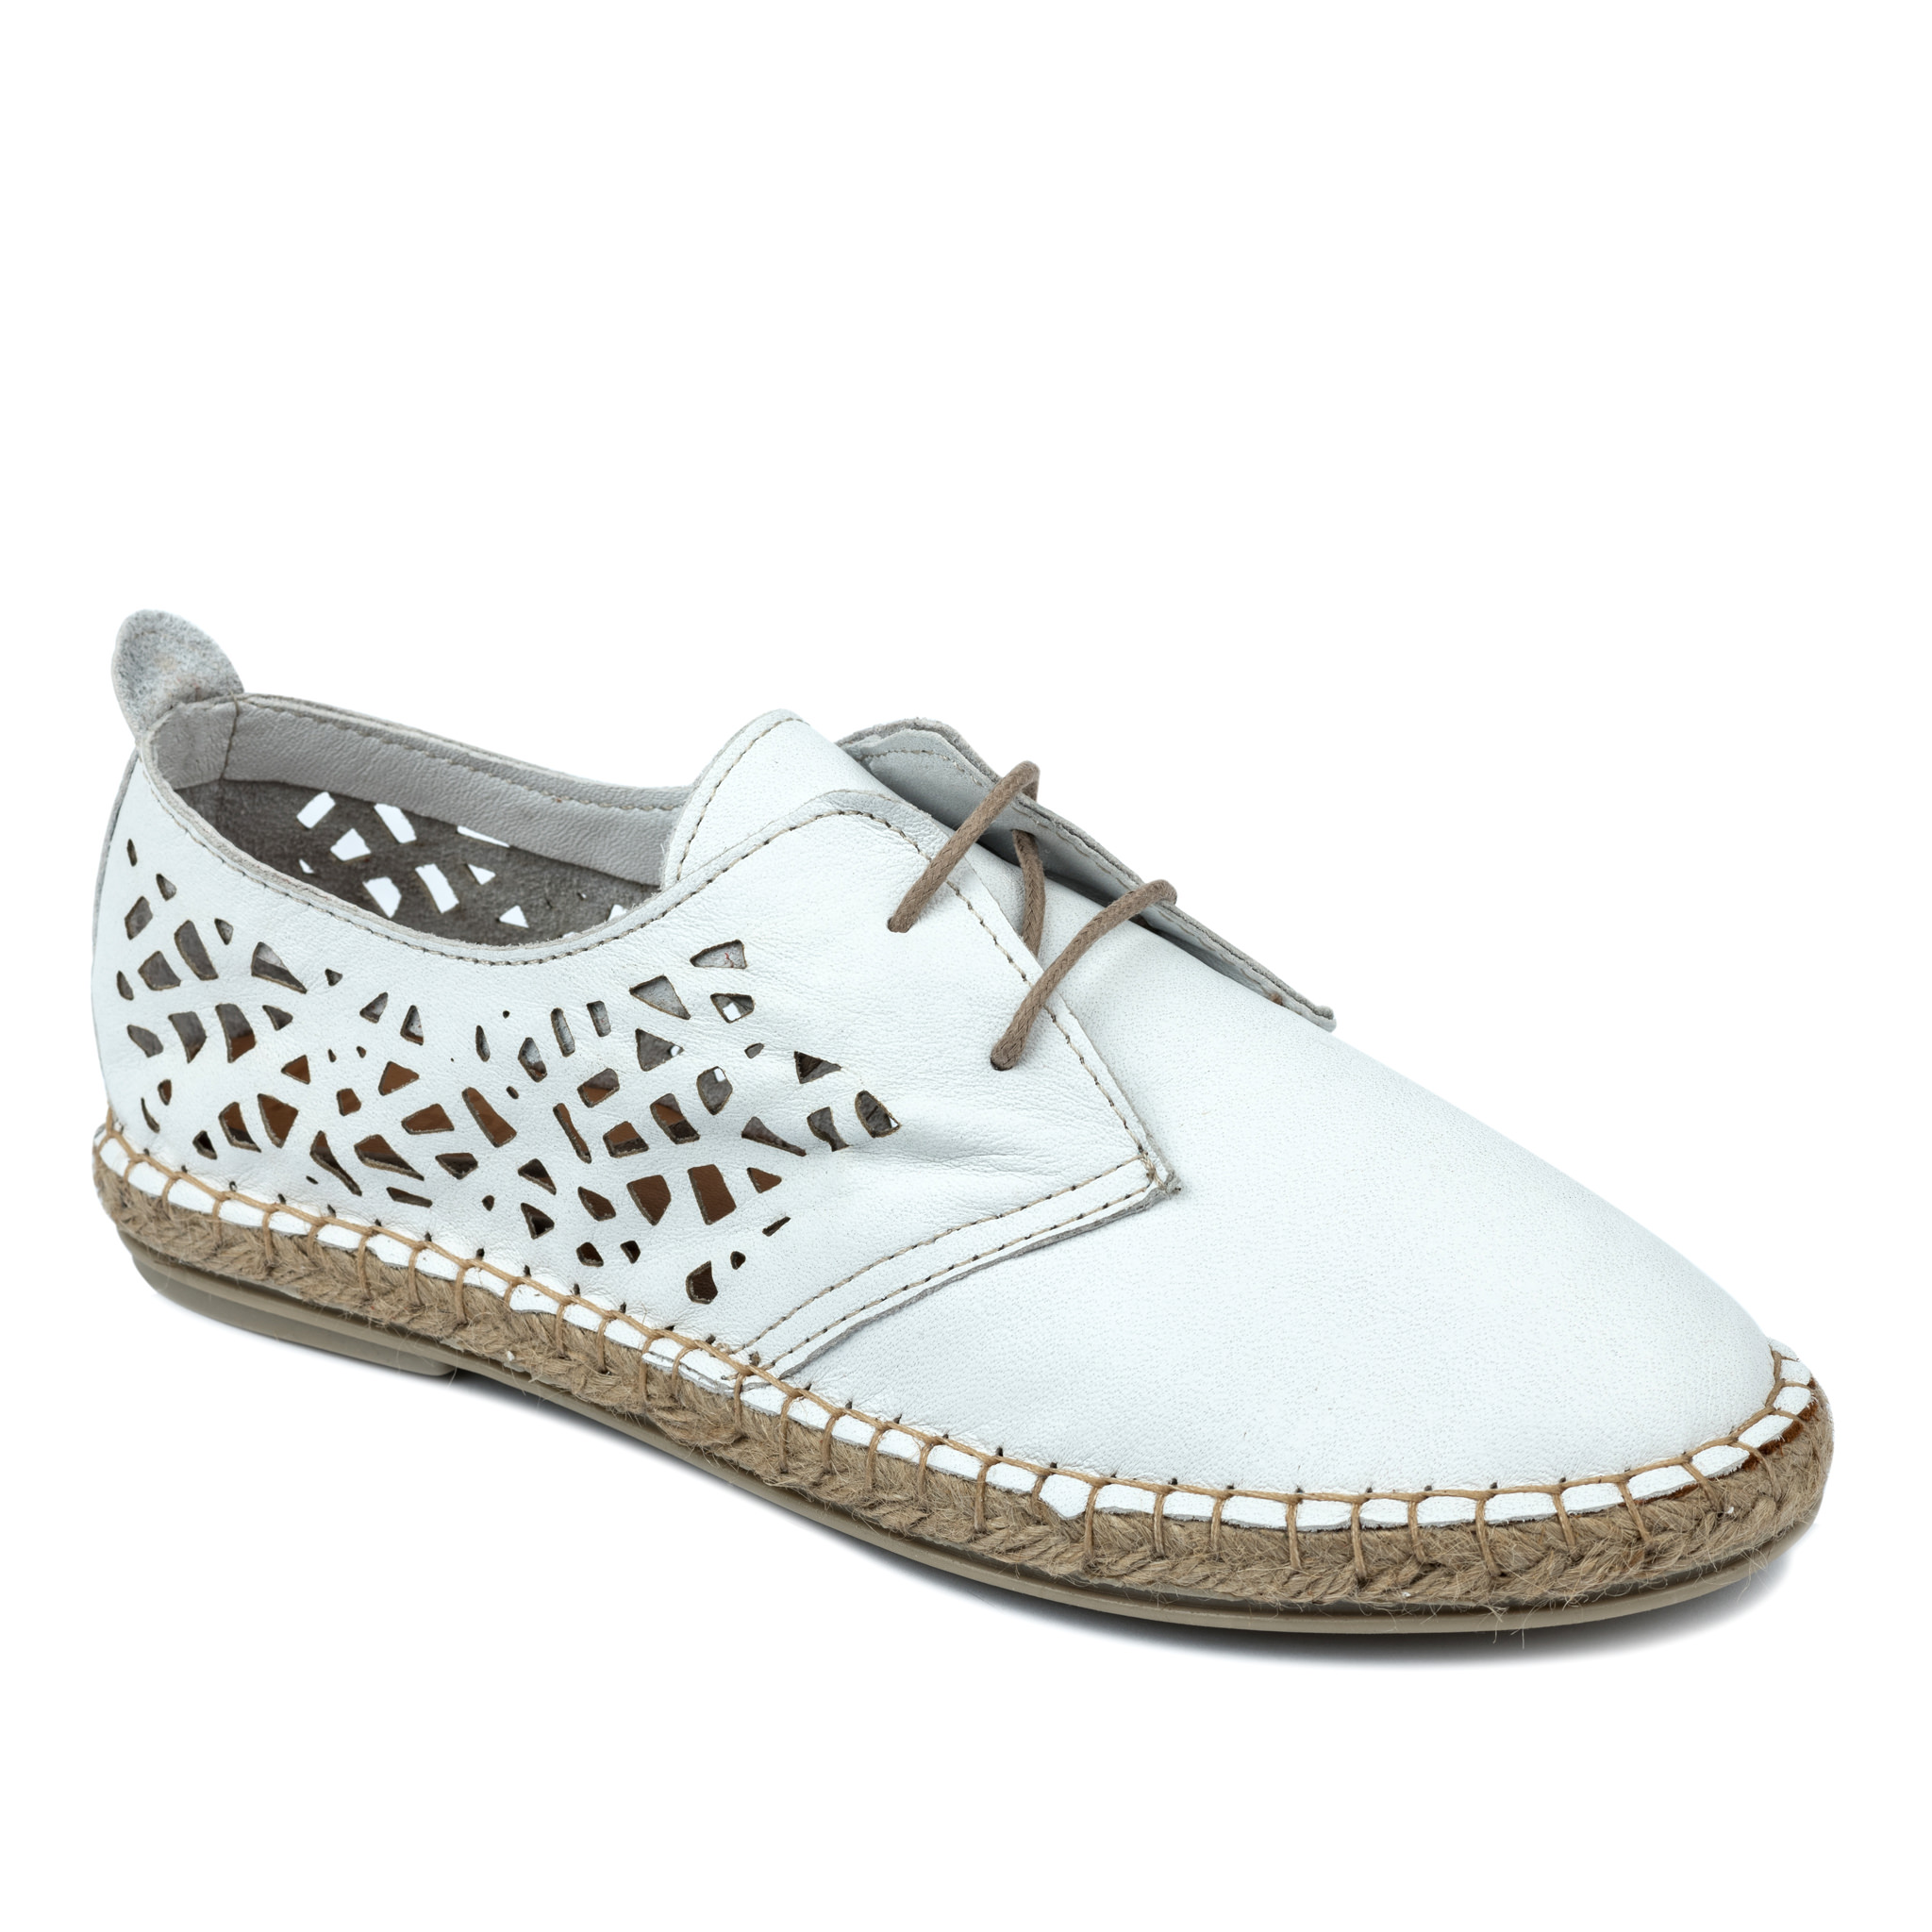 Leather espadrilles A573 - WHITE